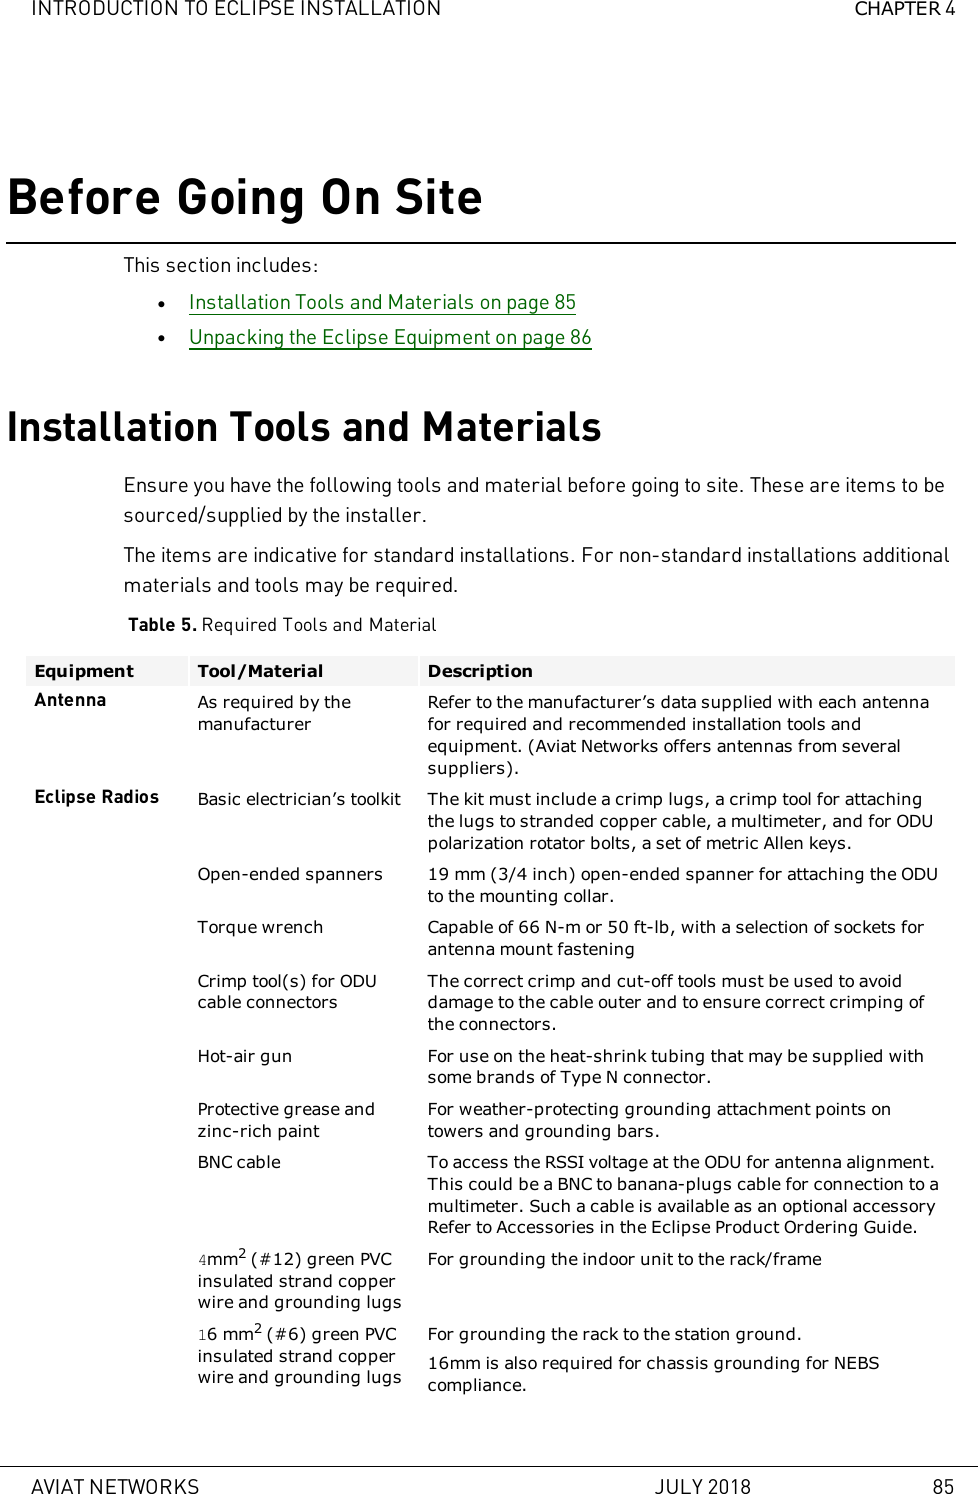 INTRODUCTION TO ECLIPSE INSTALLATION CHAPTER 4Before Going On SiteThis section includes:lInstallation Tools and Materials on page 85lUnpacking the Eclipse Equipment on page 86Installation Tools and MaterialsEnsure you have the following tools and material before going to site. These are items to besourced/supplied by the installer.The items are indicative for standard installations. For non-standard installations additionalmaterials and tools may be required.Table 5. Required Tools and MaterialEquipment Tool/Material DescriptionAntenna As required by themanufacturerRefer to the manufacturer’s data supplied with each antennafor required and recommended installation tools andequipment. (Aviat Networks offers antennas from severalsuppliers).Eclipse Radios Basic electrician’s toolkit The kit must include a crimp lugs, a crimp tool for attachingthe lugs to stranded copper cable, a multimeter, and for ODUpolarization rotator bolts, a set of metric Allen keys.Open-ended spanners 19mm (3/4 inch) open-ended spanner for attaching the ODUto the mounting collar.Torque wrench Capable of 66 N-m or 50 ft-lb, with a selection of sockets forantenna mount fasteningCrimp tool(s) for ODUcable connectorsThe correct crimp and cut-off tools must be used to avoiddamage to the cable outer and to ensure correct crimping ofthe connectors.Hot-air gun For use on the heat-shrink tubing that may be supplied withsome brands of TypeN connector.Protective grease andzinc-rich paintFor weather-protecting grounding attachment points ontowers and grounding bars.BNC cable To access the RSSI voltage at the ODU for antenna alignment.This could be a BNC to banana-plugs cable for connection to amultimeter. Such a cable is available as an optional accessoryRefer to Accessories in the Eclipse Product Ordering Guide.4mm2(#12) green PVCinsulated strand copperwire and grounding lugsFor grounding the indoor unit to the rack/frame16 mm2(#6) green PVCinsulated strand copperwire and grounding lugsFor grounding the rack to the station ground.16mm is also required for chassis grounding for NEBScompliance.AVIAT NETWORKS JULY 2018 85